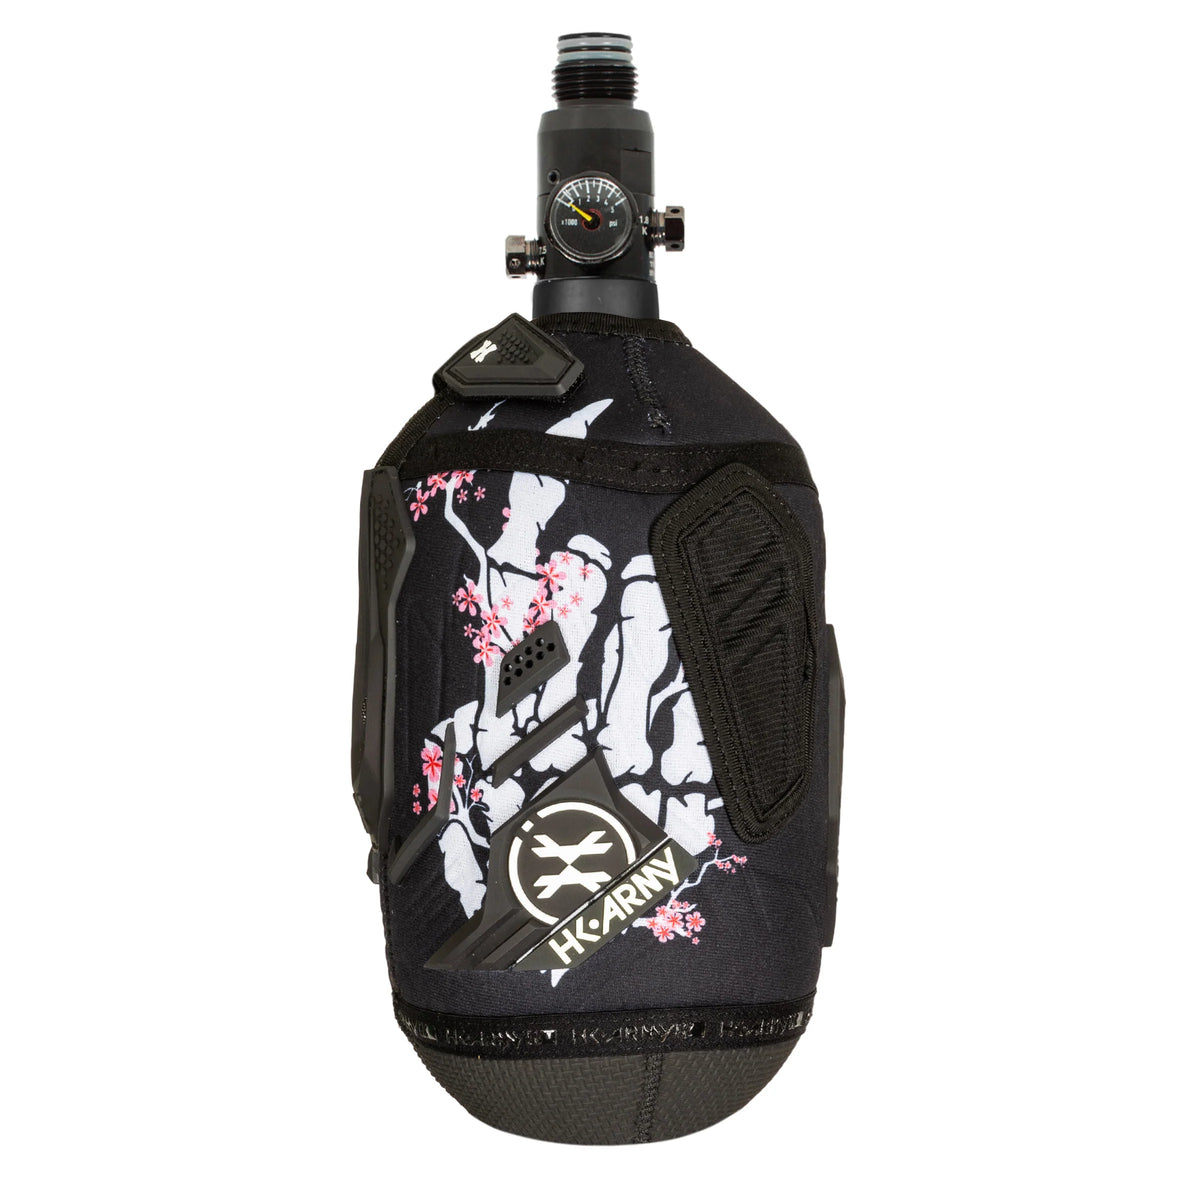 Paintball air tank cover / sleeve | hardline armored - Color: Gang gang rebirth